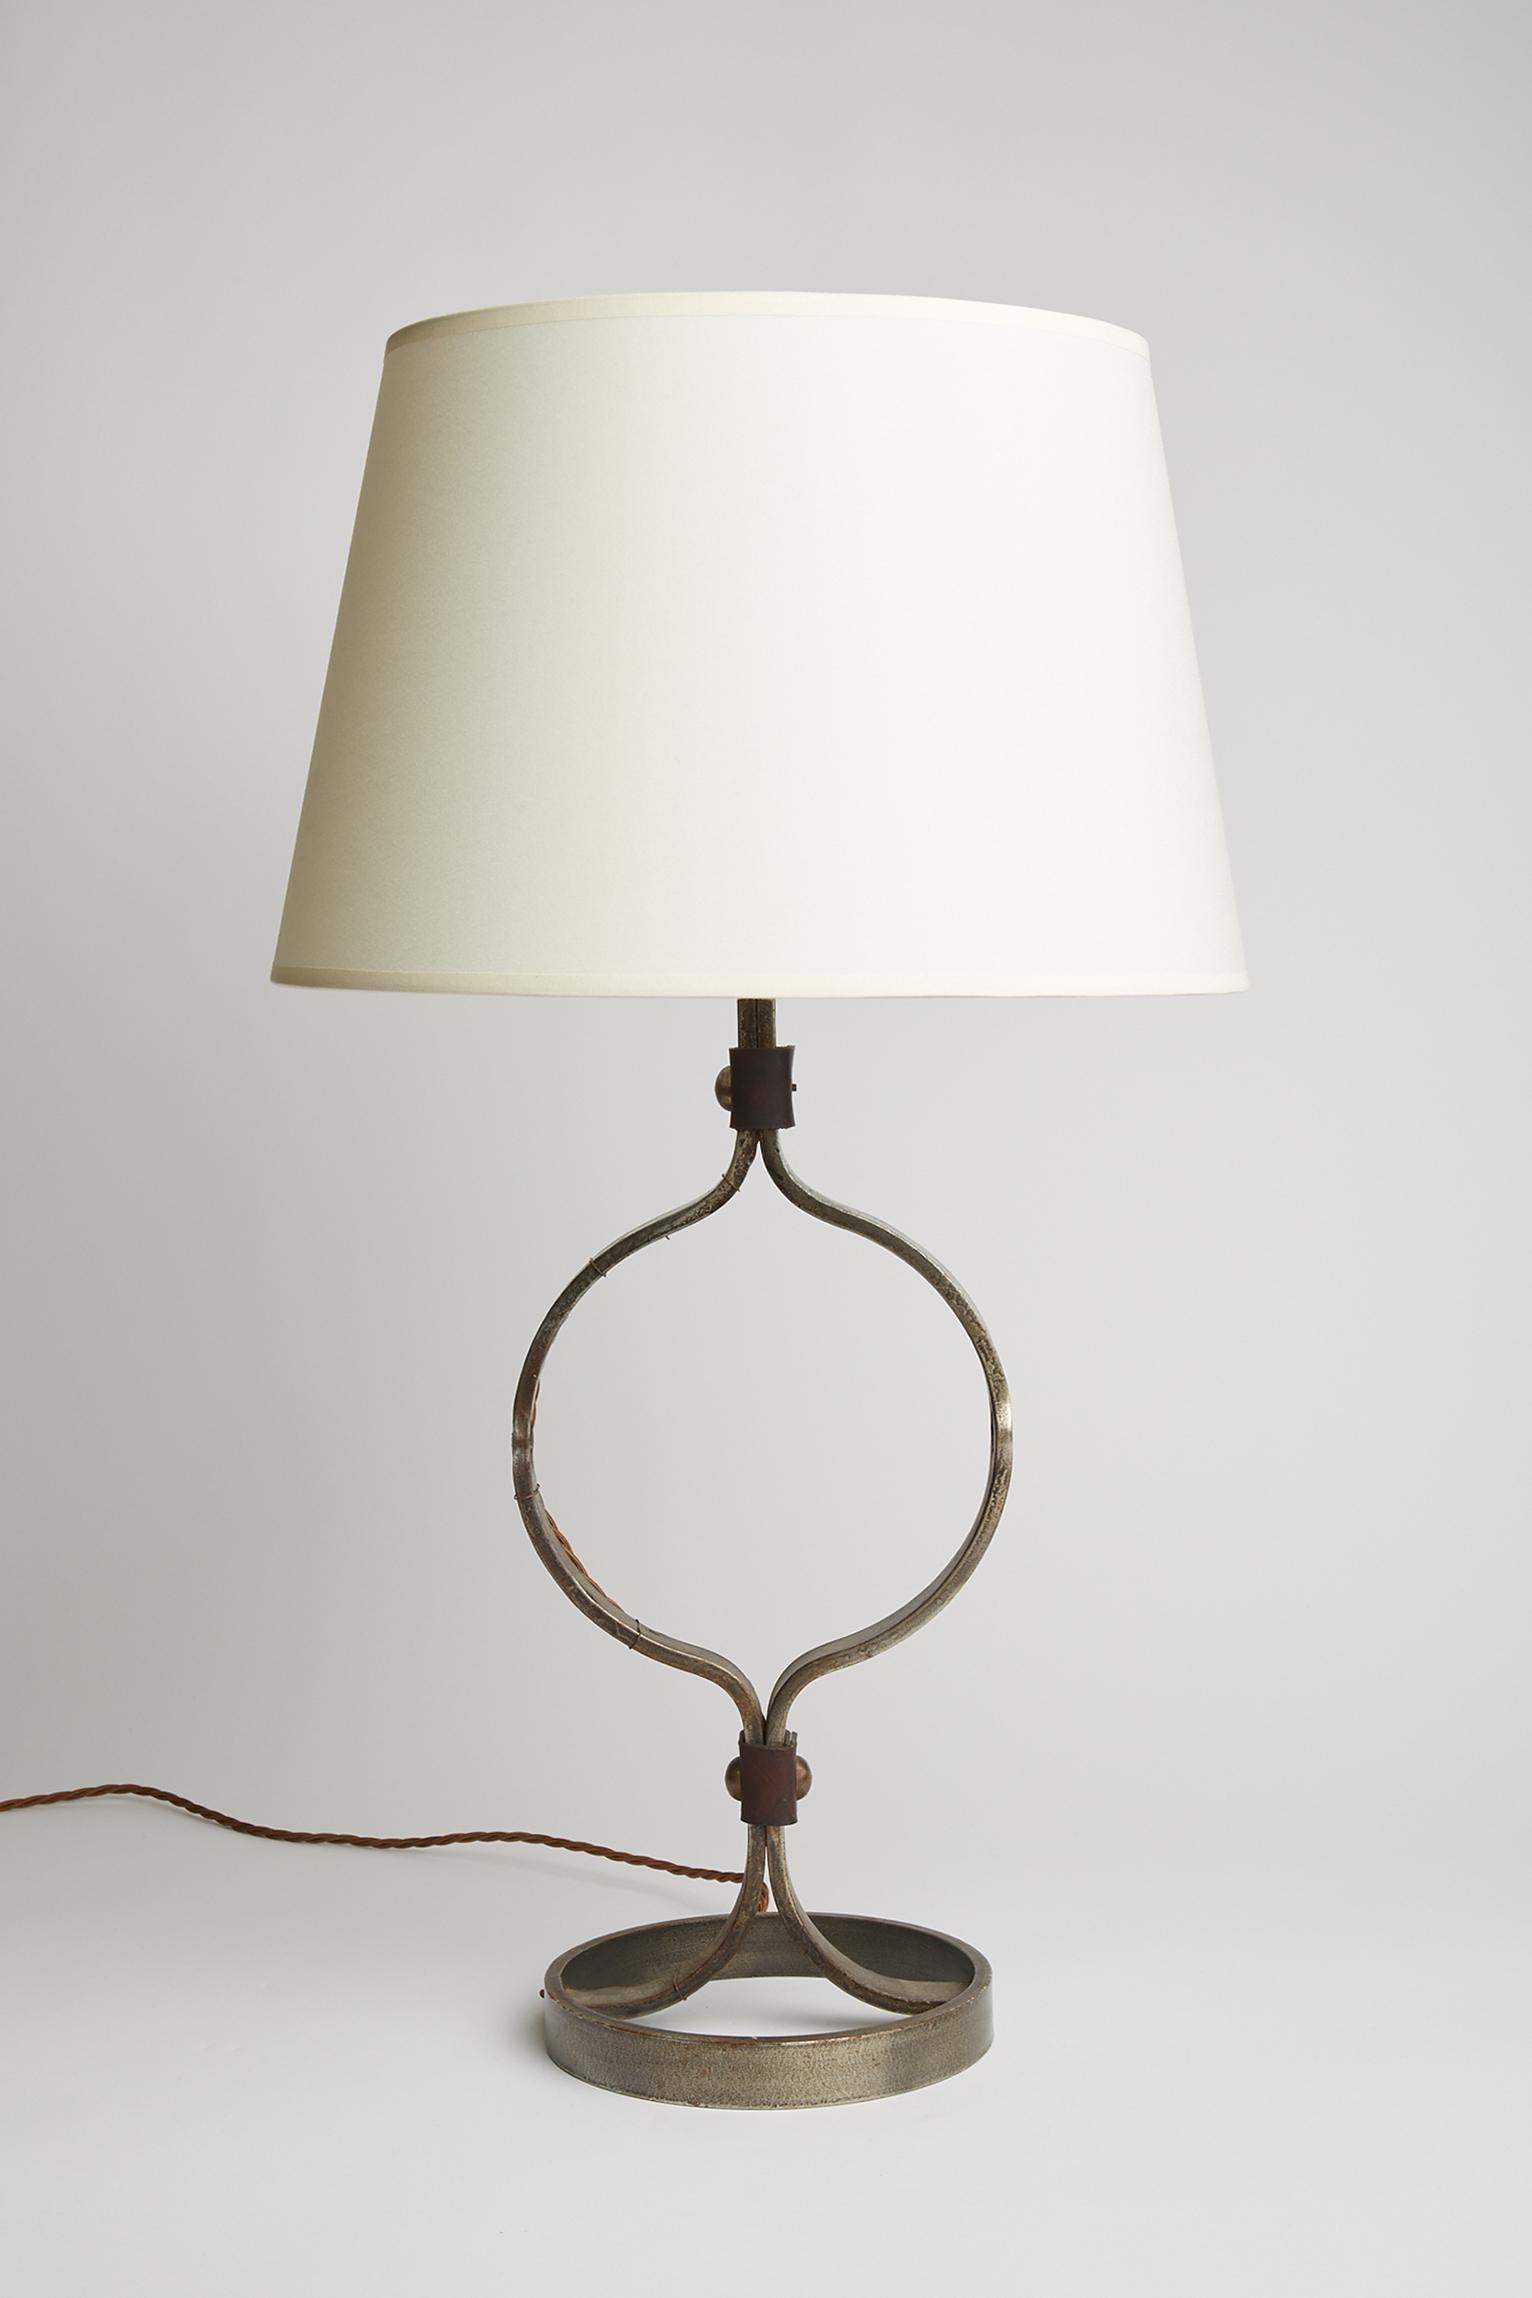 A wrought iron and studded brown leather table lamp by Jean-Pierre Ryckaert. 
France, Circa 1950
With the shade: 74 cm high by 40 cm diameter 
Lamp base only: 53 cm high by 19.5 cm diameter.